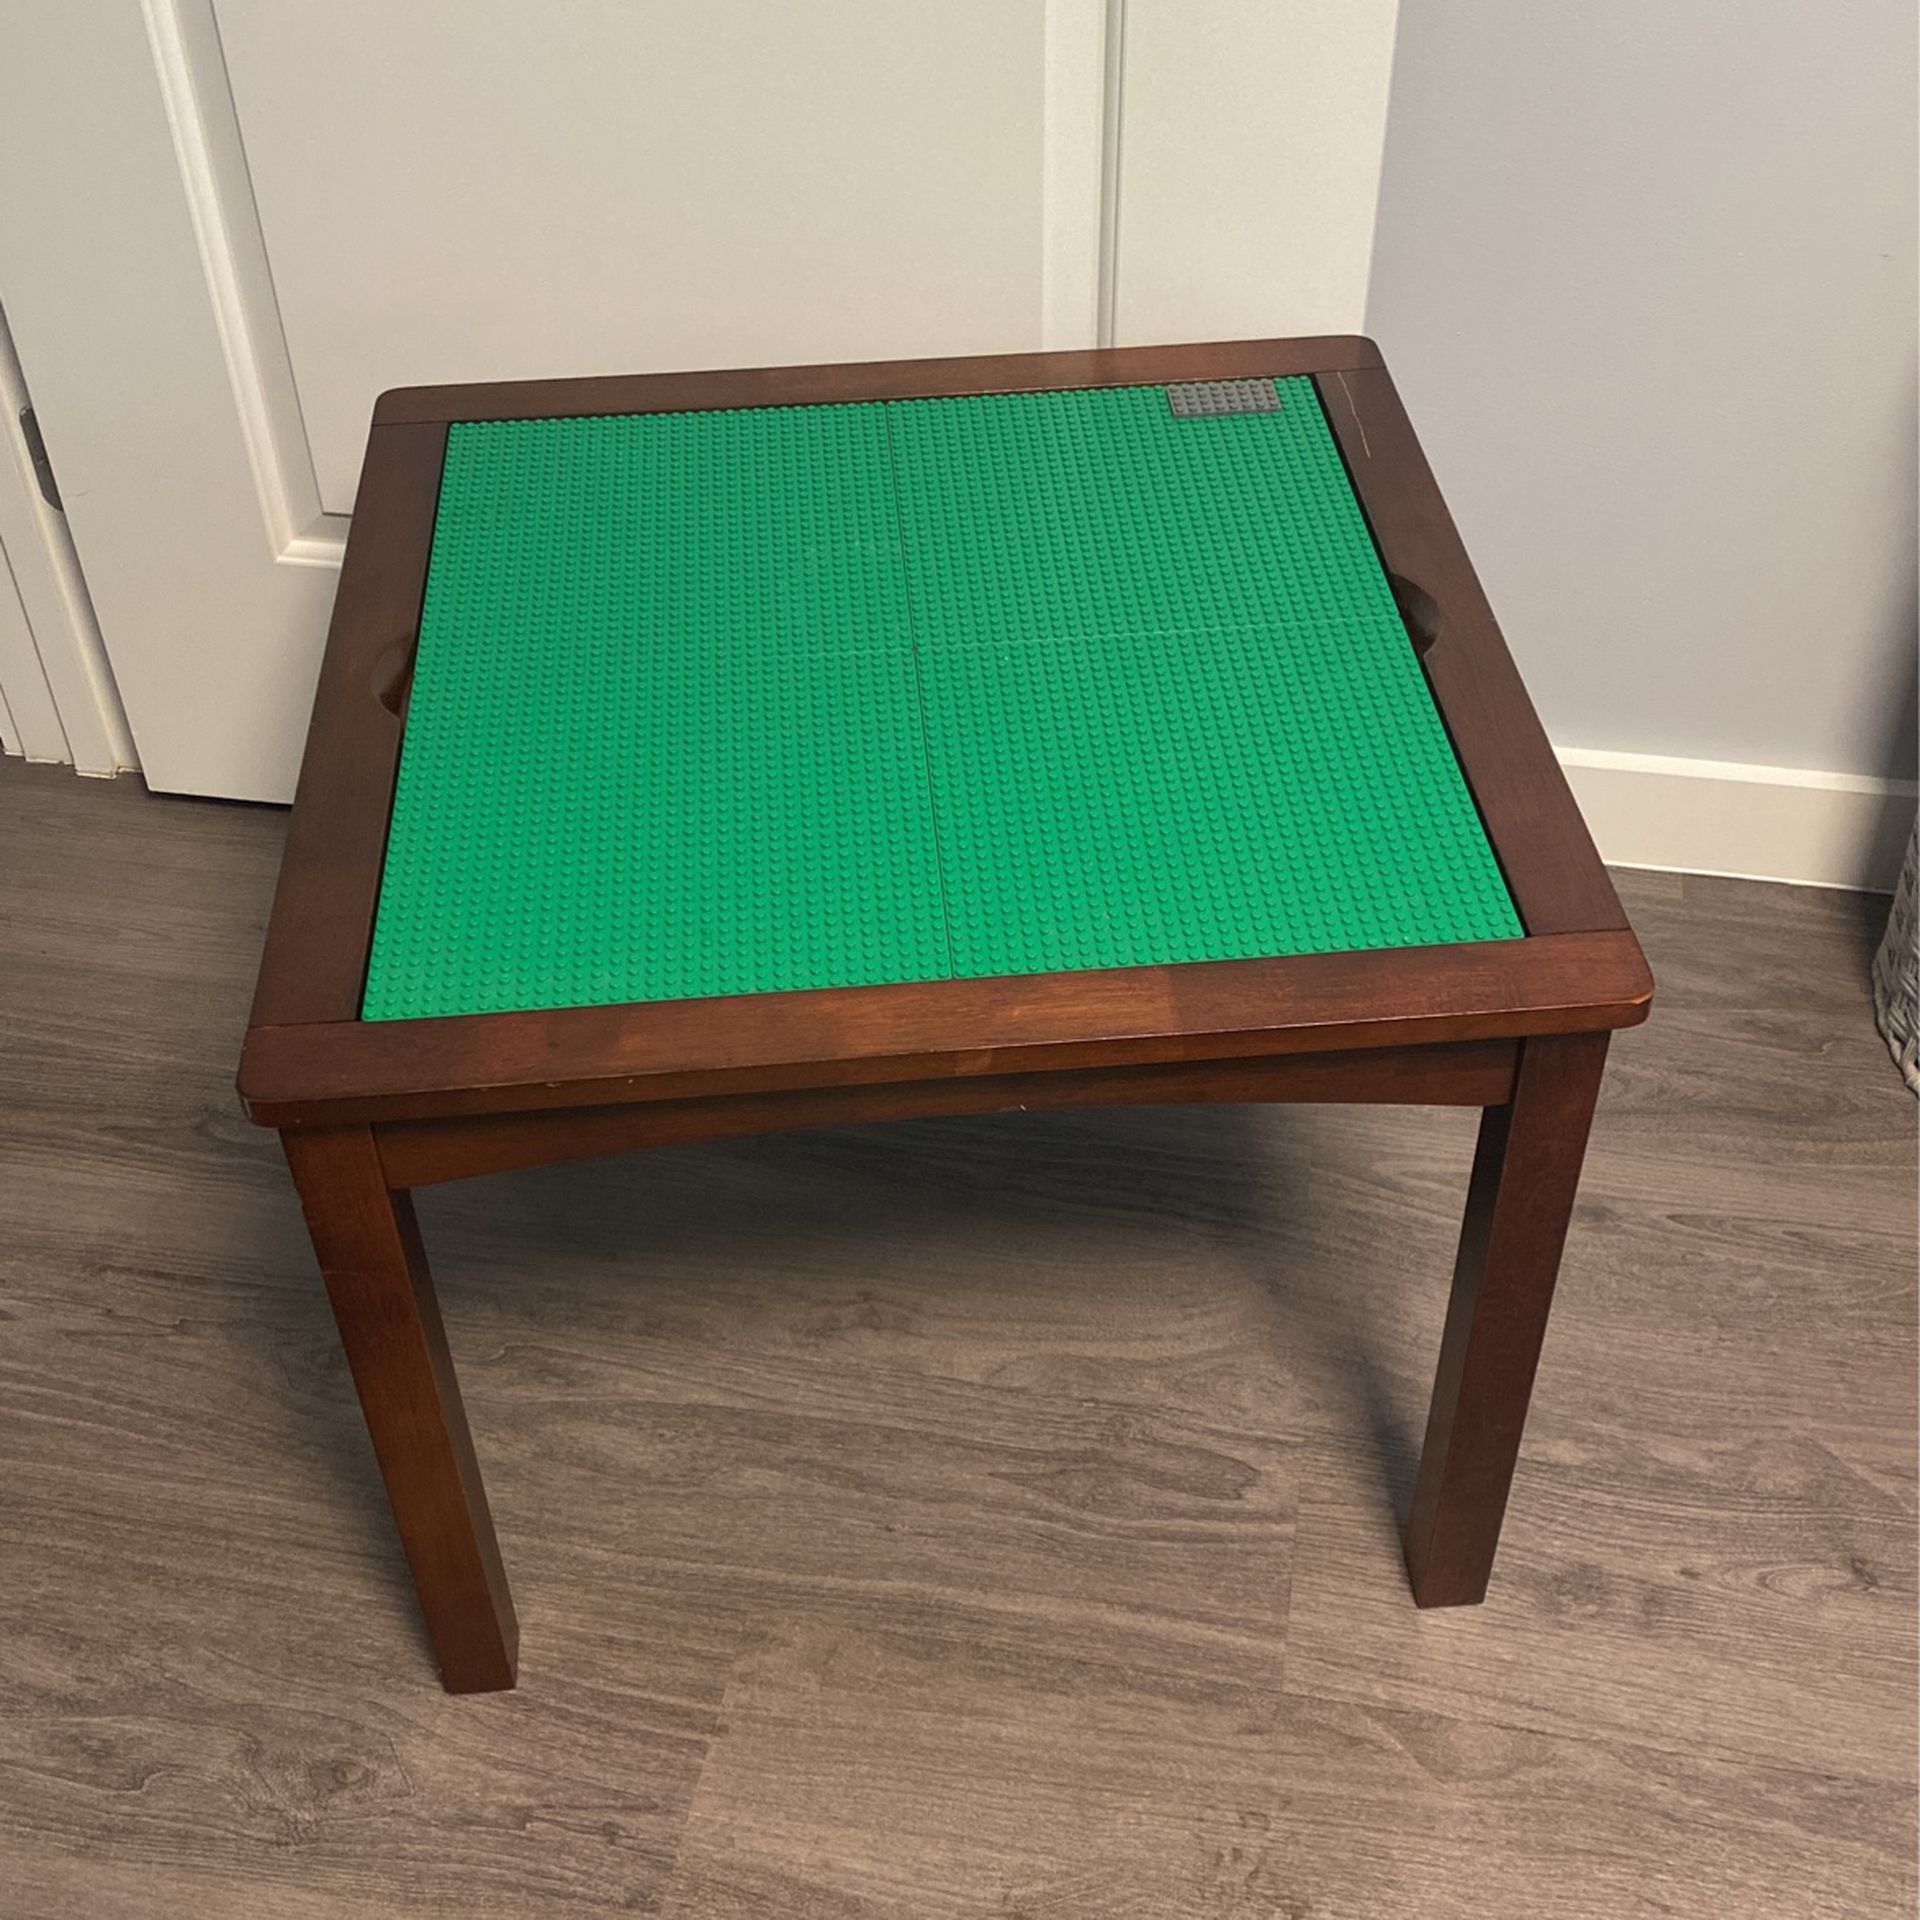 Wooden Lego Table for in Roslyn Heights, NY - OfferUp